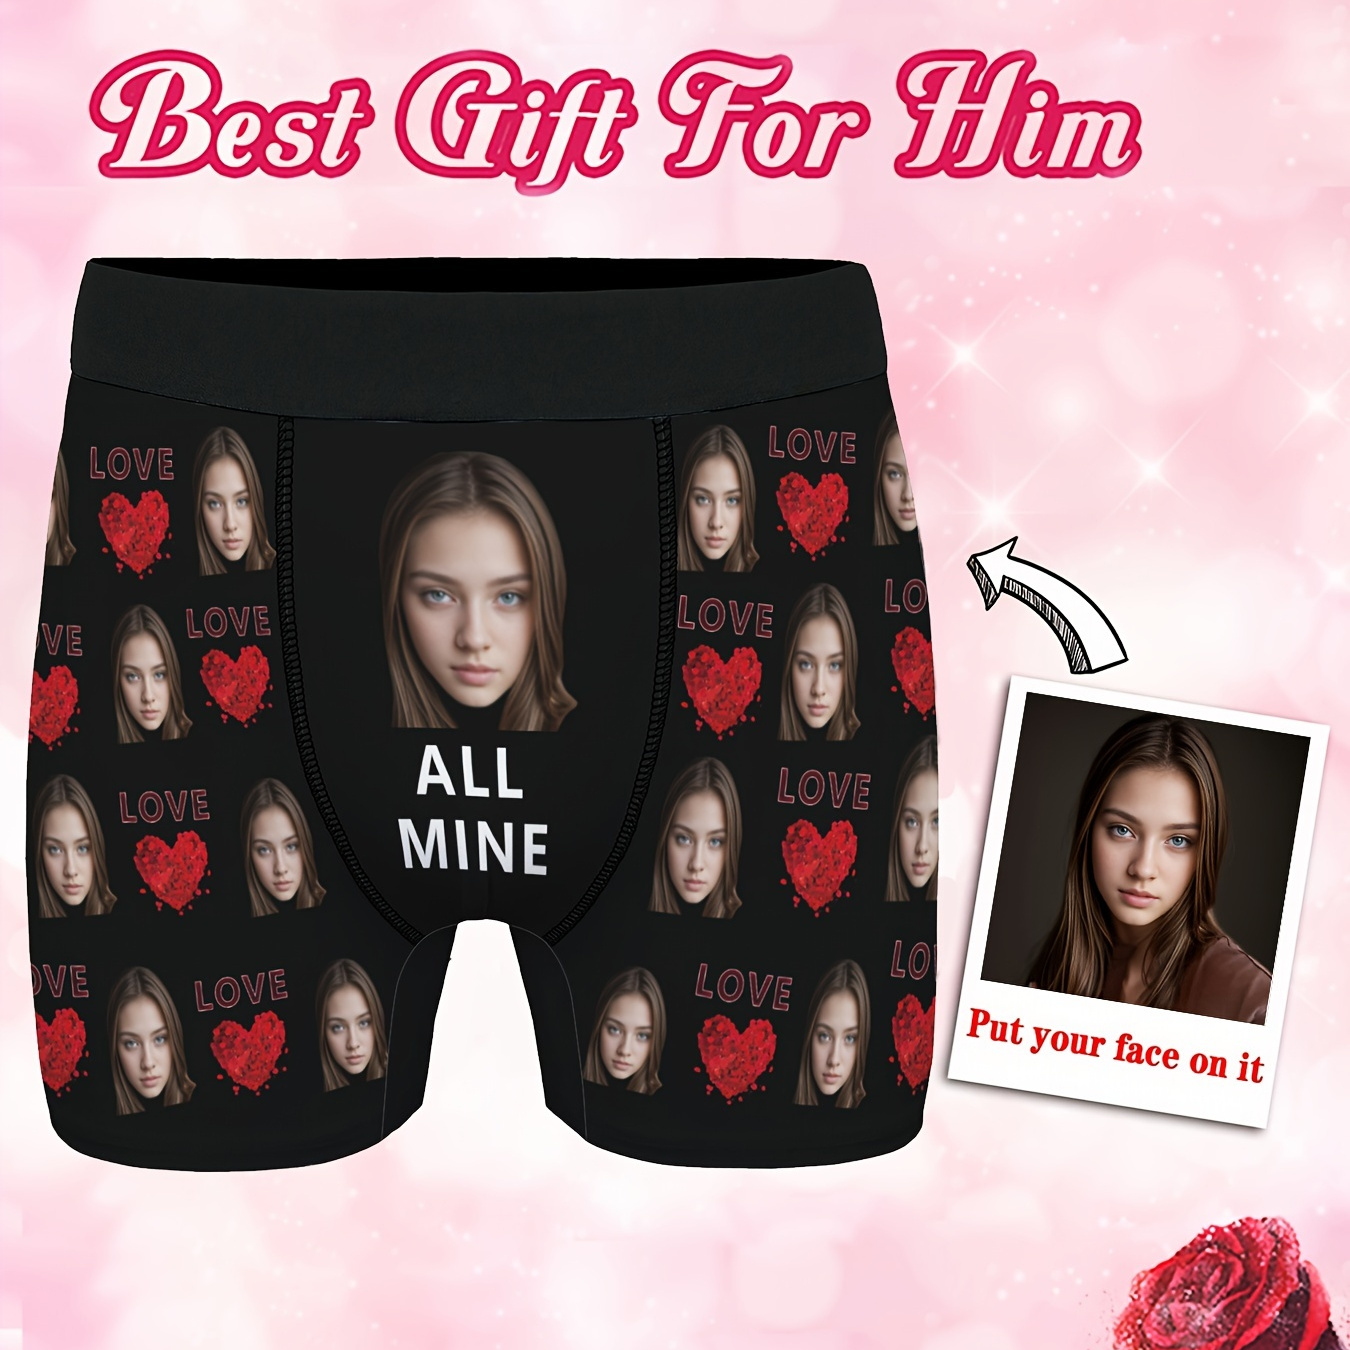 

Custom Men's Underwear Face Photo Personalized Boxer Briefs For Boyfriend Husband, All Mine Print Fashion High Elastic Comfortable Underpants Holiday For Him As Gifts